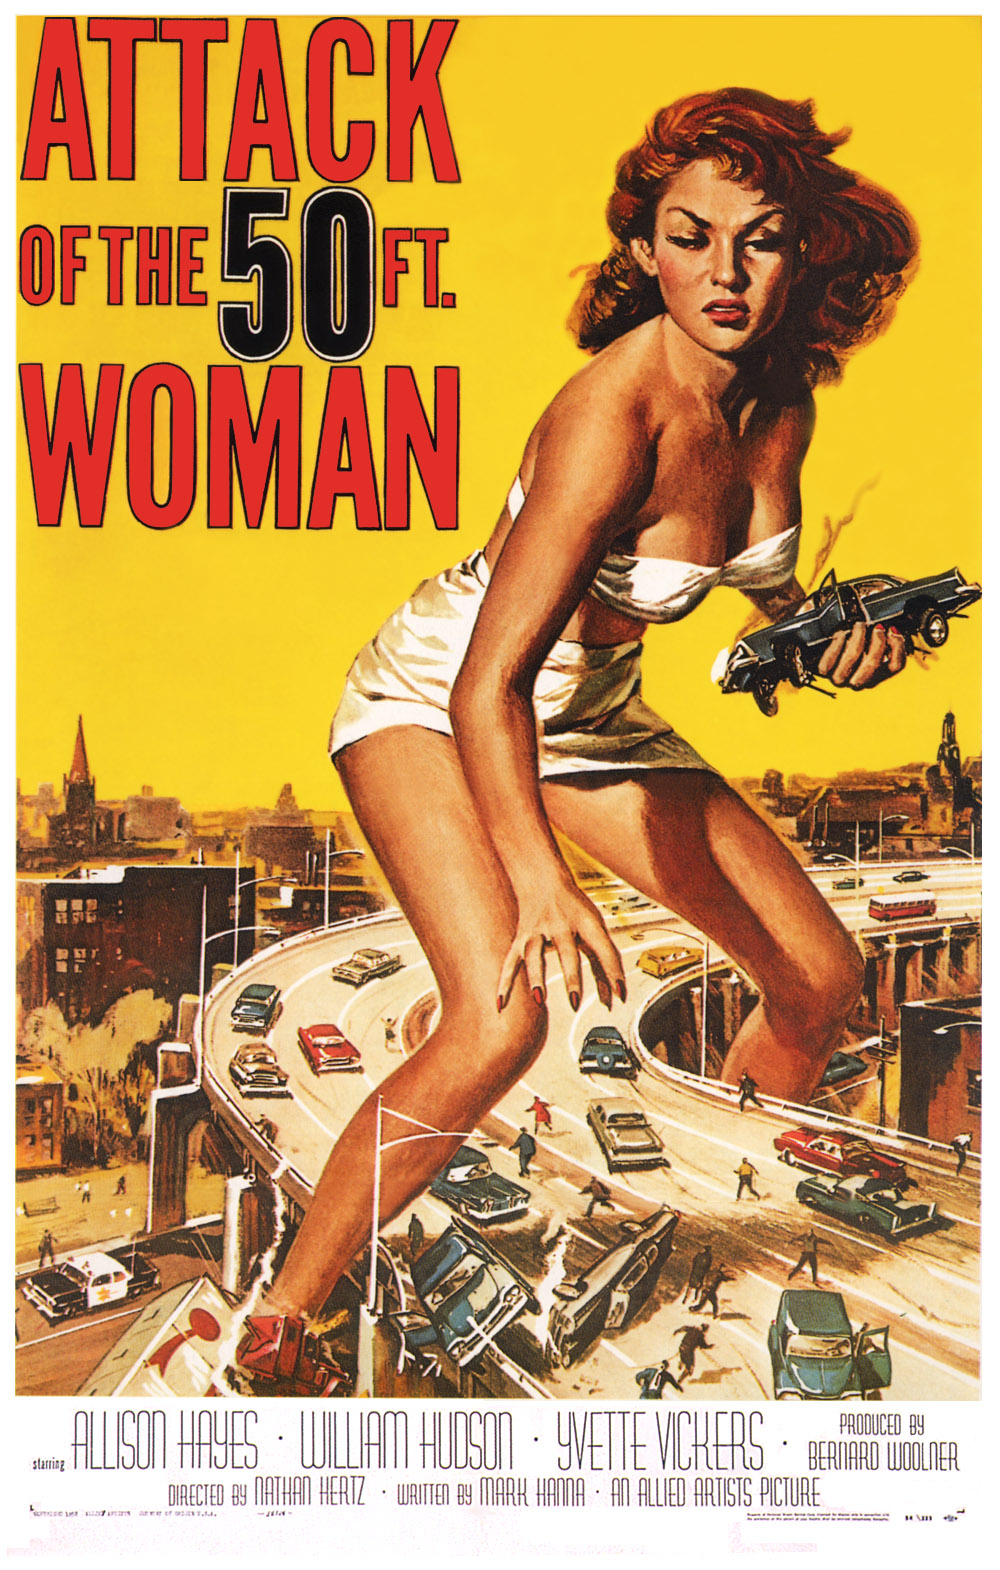 Attack of the 50 Foot Woman movie